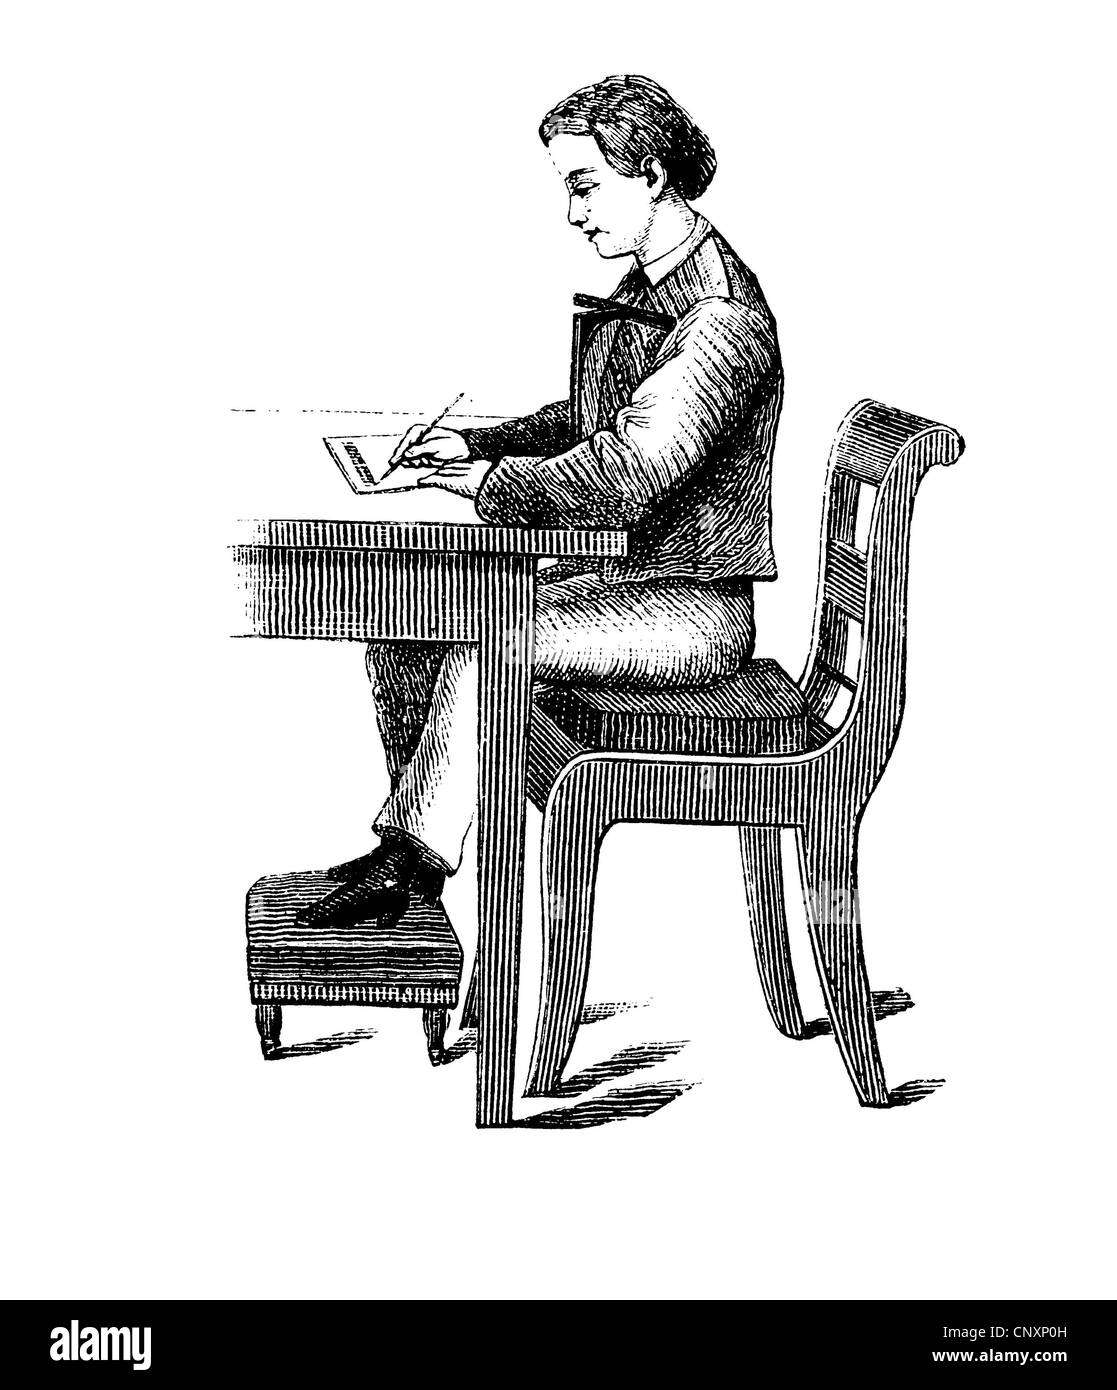 Schreber'sche Geradehalter, a support for sitting straight while writing, school desk with assisted seating, historical engravin Stock Photo